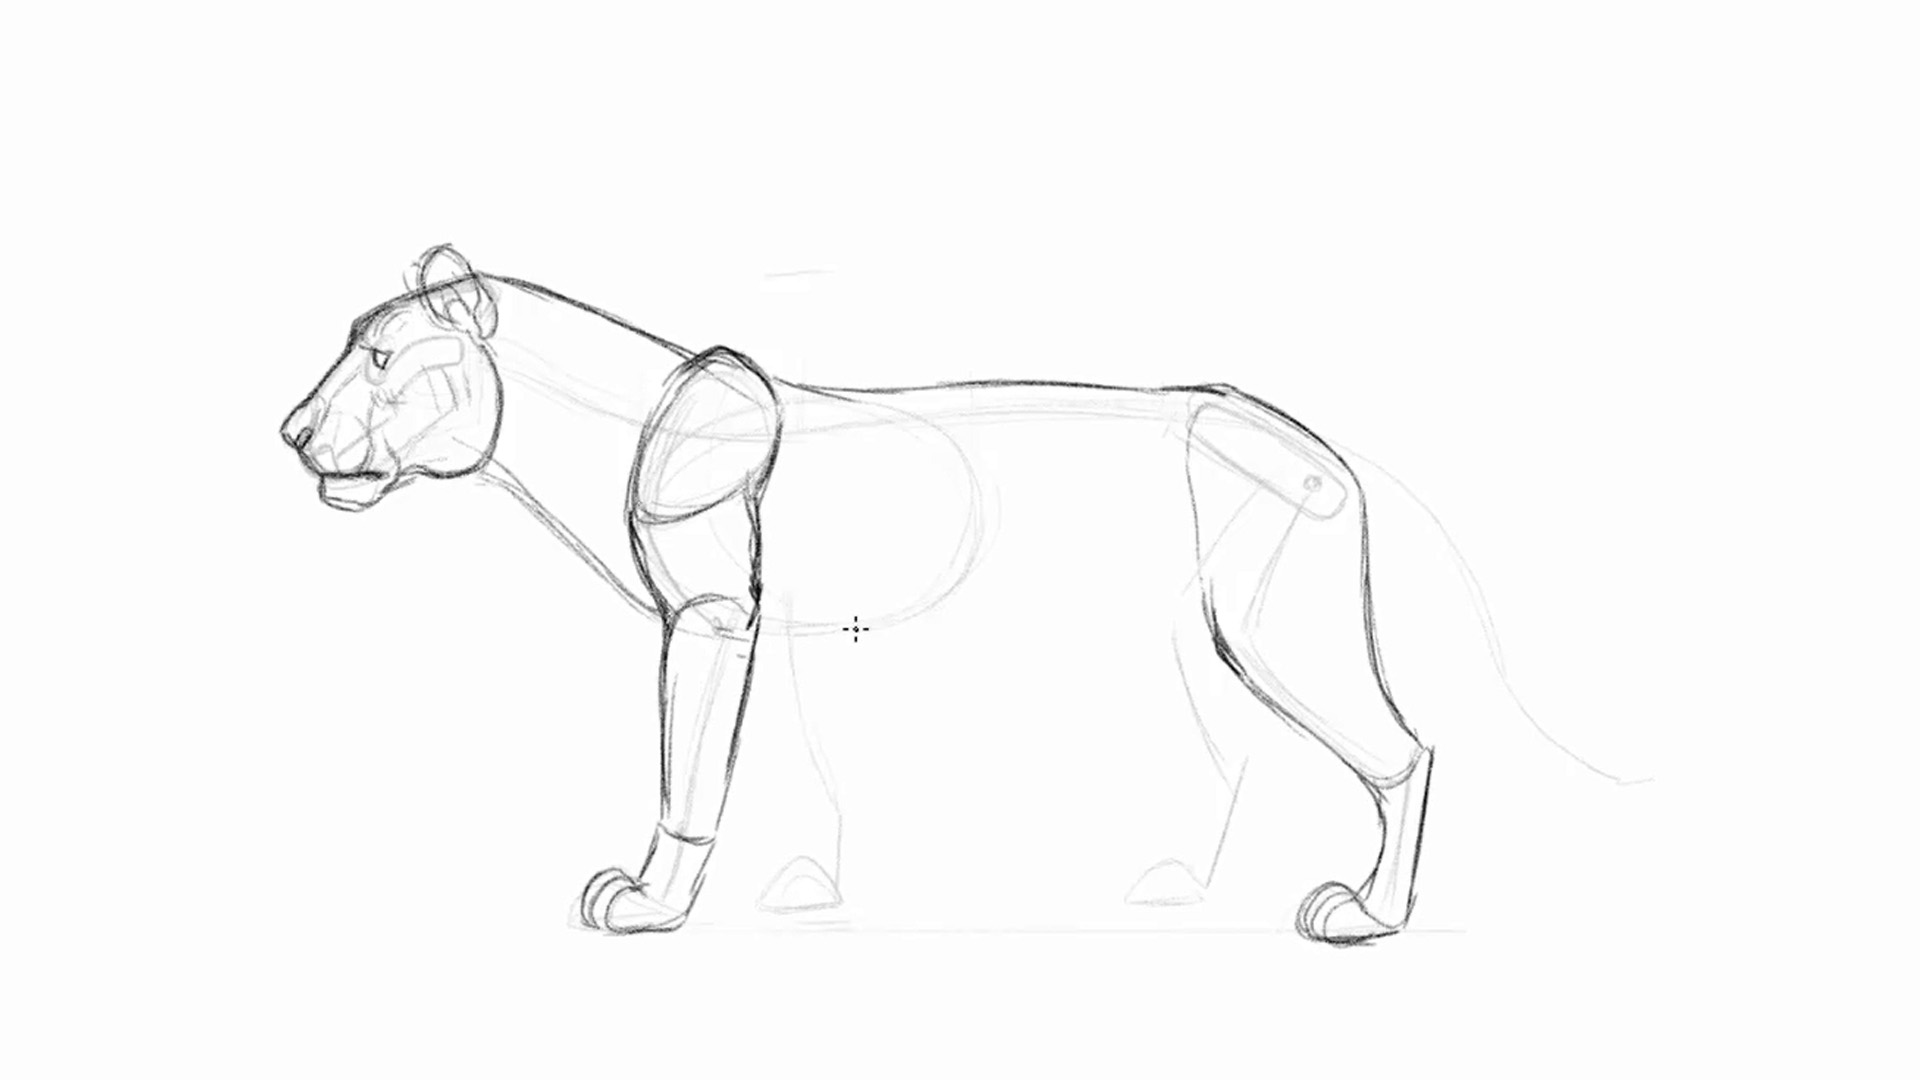 sketch of a lion with legs drawn in more detail